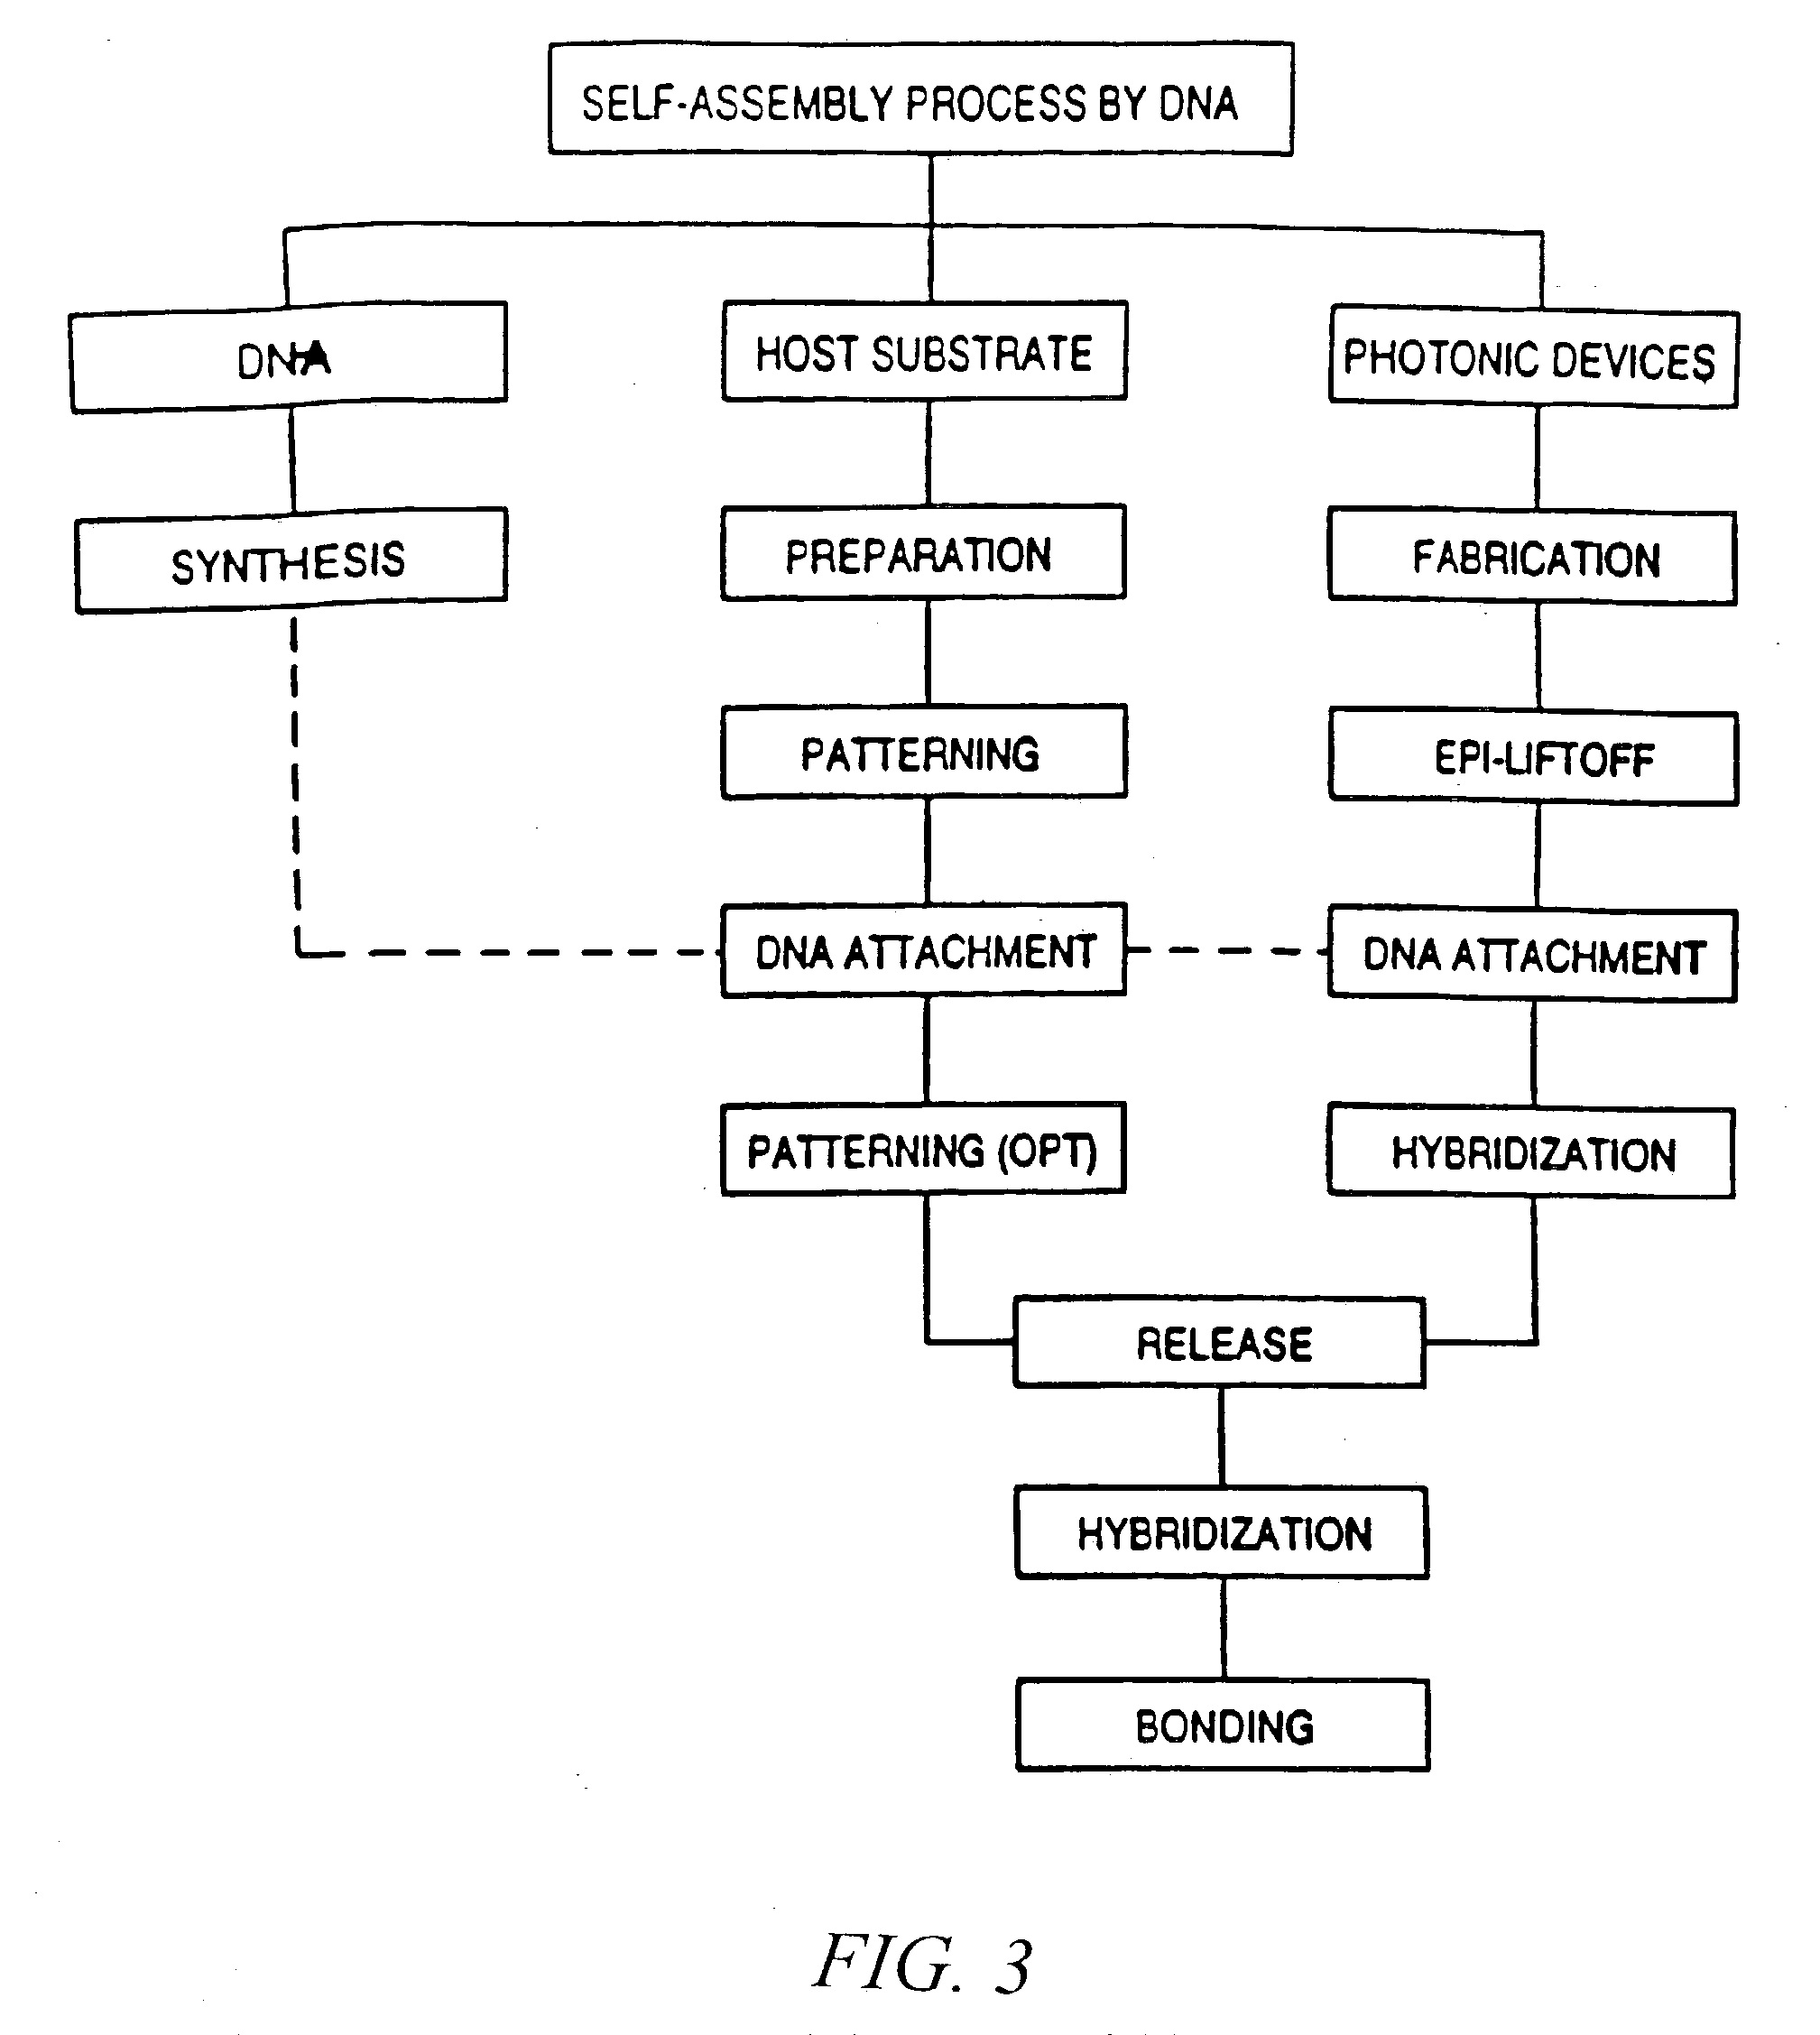 Methods for the electronic, homogeneous assembly and fabrication of devices